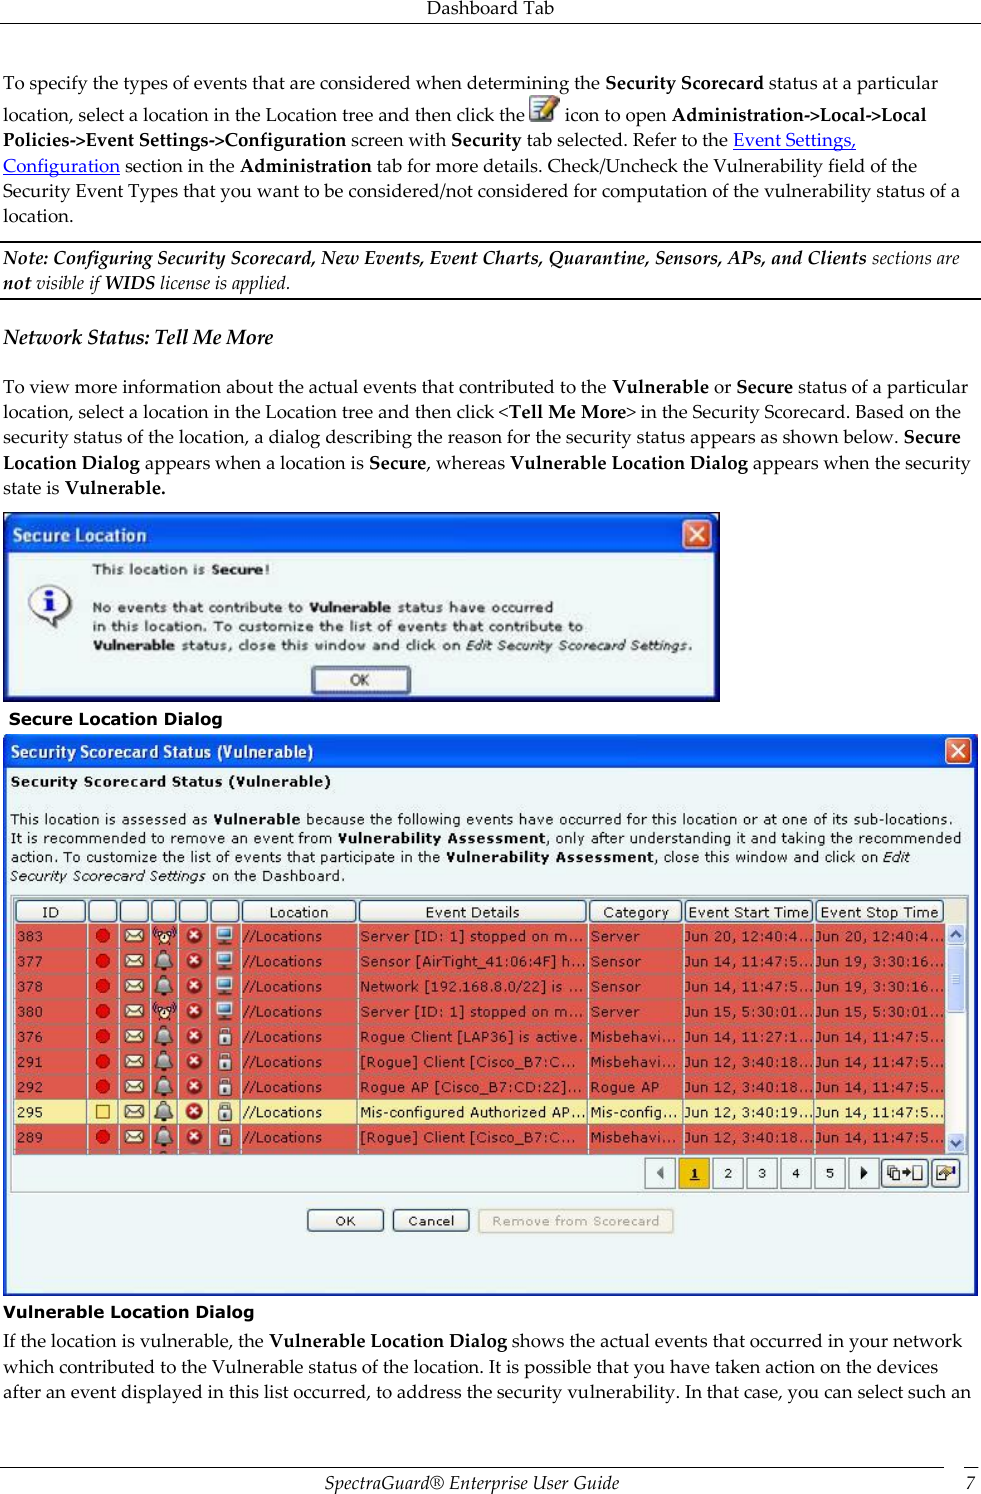 Dashboard Tab SpectraGuard®  Enterprise User Guide 7 To specify the types of events that are considered when determining the Security Scorecard status at a particular location, select a location in the Location tree and then click the   icon to open Administration-&gt;Local-&gt;Local Policies-&gt;Event Settings-&gt;Configuration screen with Security tab selected. Refer to the Event Settings, Configuration section in the Administration tab for more details. Check/Uncheck the Vulnerability field of the Security Event Types that you want to be considered/not considered for computation of the vulnerability status of a location. Note: Configuring Security Scorecard, New Events, Event Charts, Quarantine, Sensors, APs, and Clients sections are not visible if WIDS license is applied. Network Status: Tell Me More To view more information about the actual events that contributed to the Vulnerable or Secure status of a particular location, select a location in the Location tree and then click &lt;Tell Me More&gt; in the Security Scorecard. Based on the security status of the location, a dialog describing the reason for the security status appears as shown below. Secure Location Dialog appears when a location is Secure, whereas Vulnerable Location Dialog appears when the security state is Vulnerable.   Secure Location Dialog  Vulnerable Location Dialog If the location is vulnerable, the Vulnerable Location Dialog shows the actual events that occurred in your network which contributed to the Vulnerable status of the location. It is possible that you have taken action on the devices after an event displayed in this list occurred, to address the security vulnerability. In that case, you can select such an 